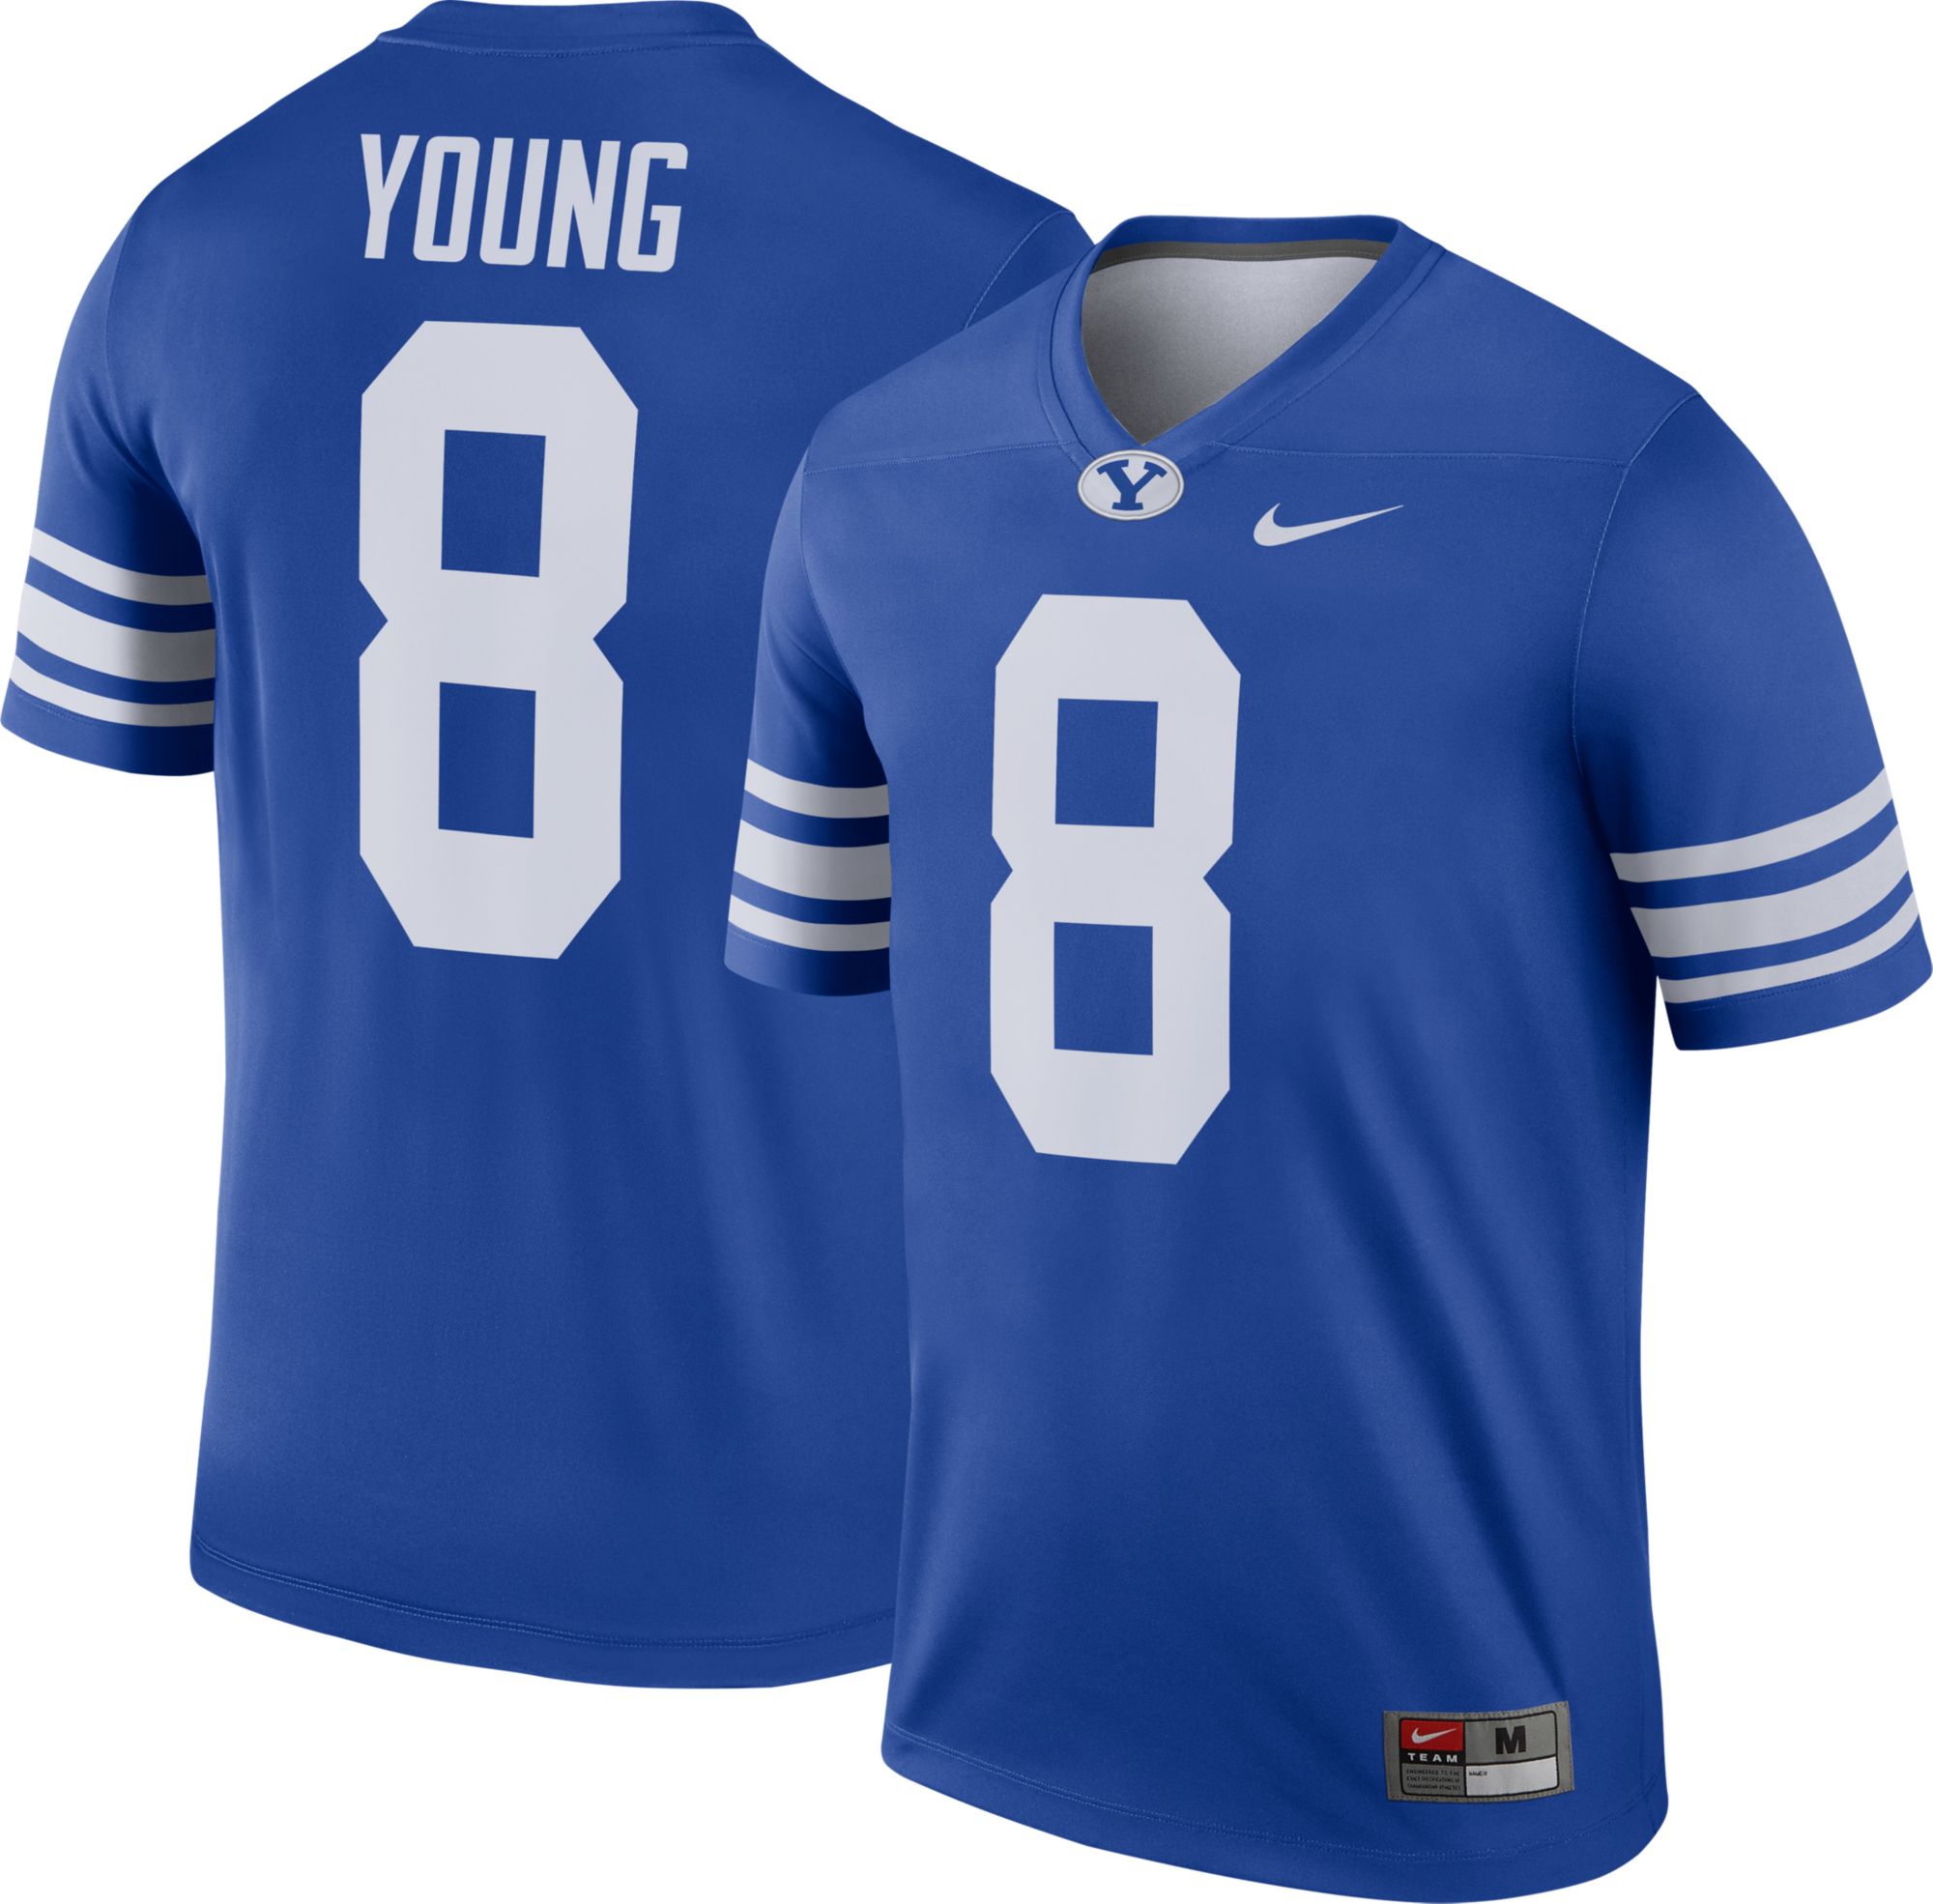 steve young byu jersey